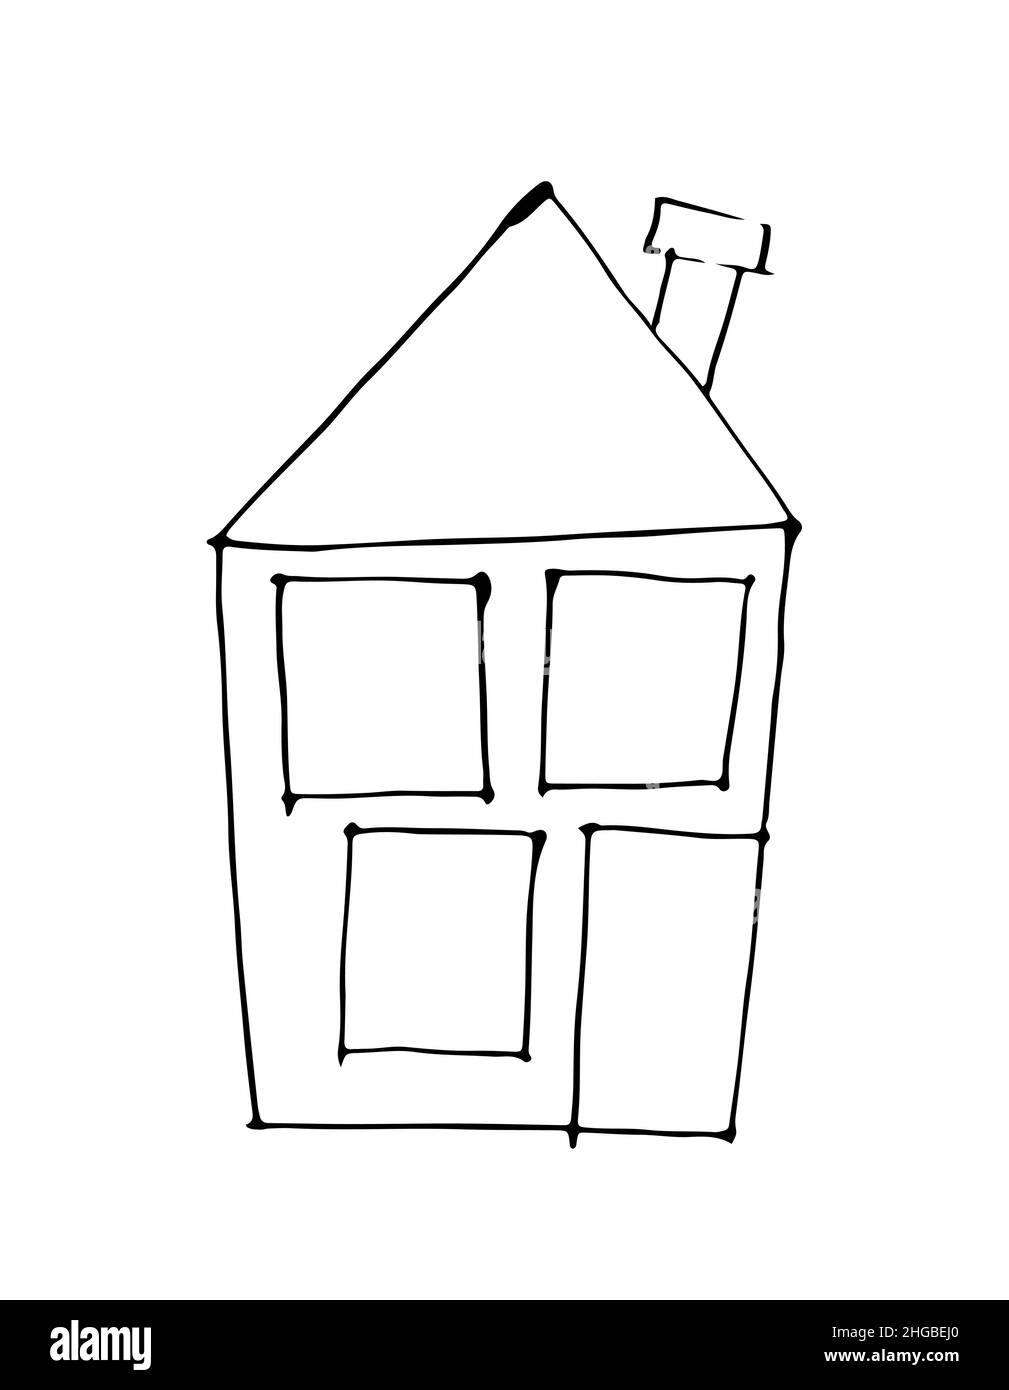 House Outline Drawing Stock Illustrations  56074 House Outline Drawing  Stock Illustrations Vectors  Clipart  Dreamstime